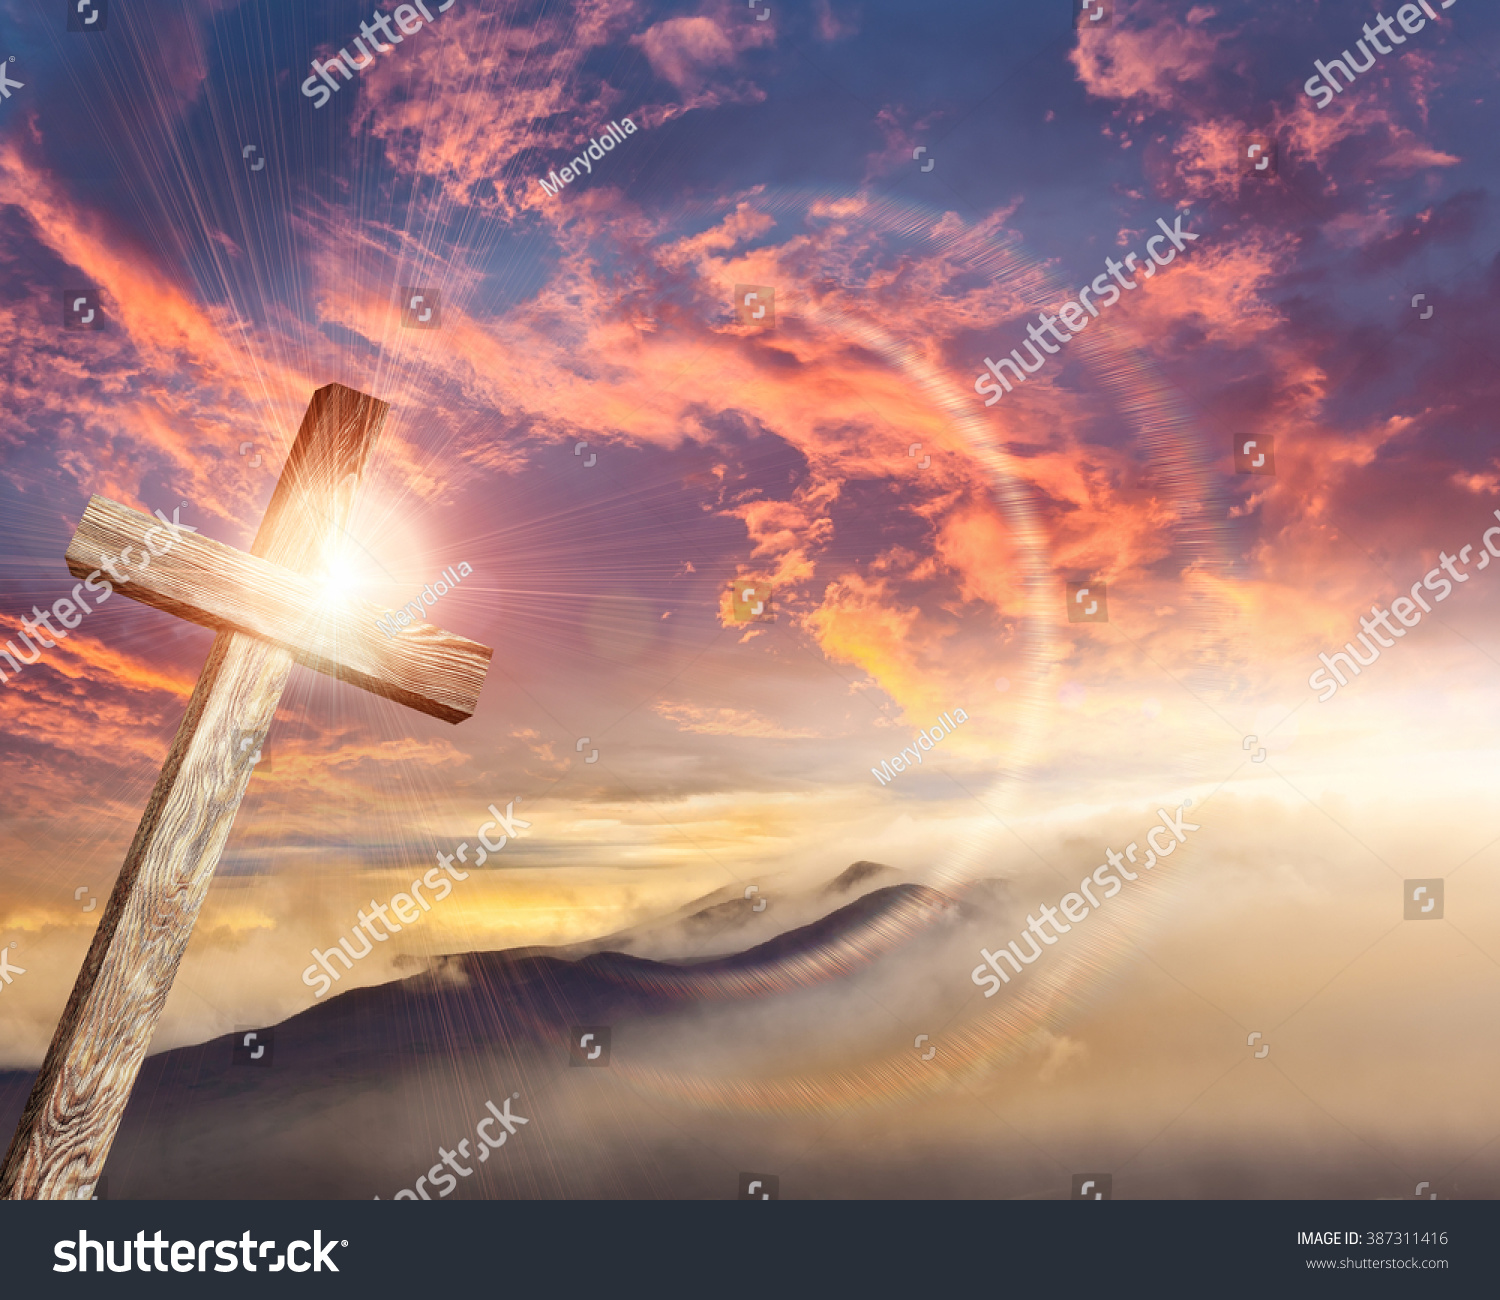 Old brown wooden cross, with sun flash  #387311416